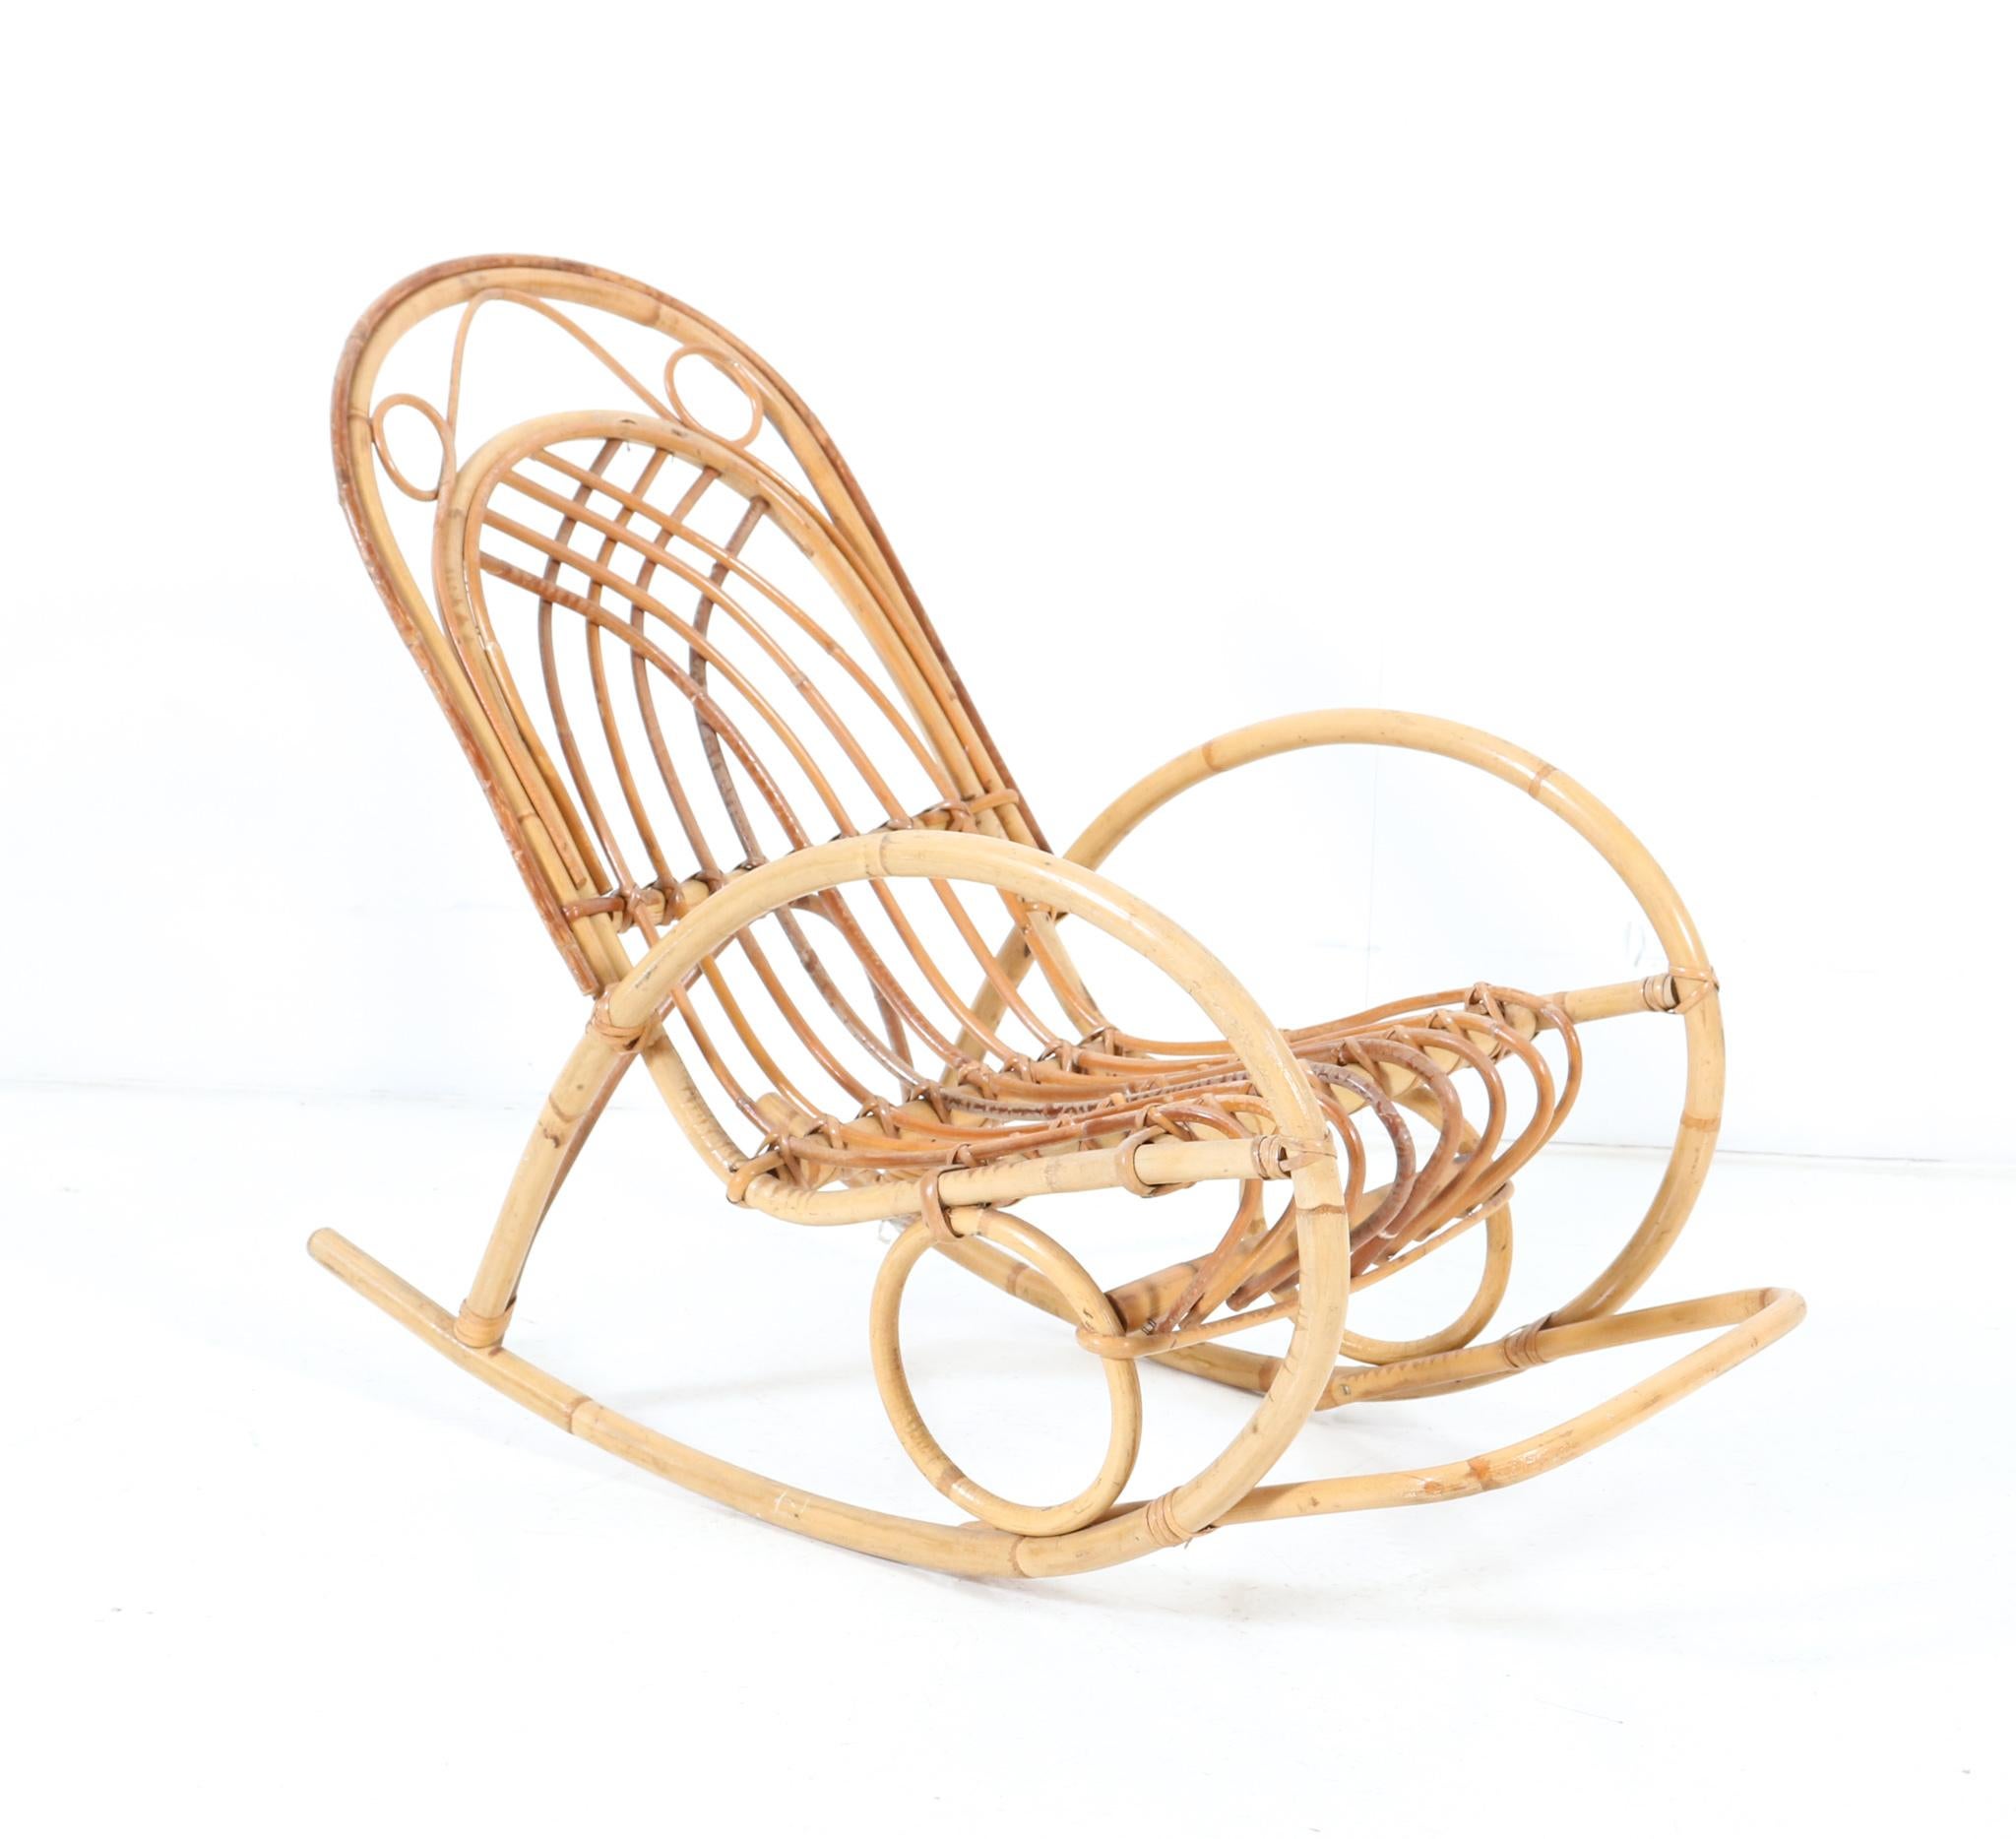 Late 20th Century Bamboo and Rattan Mid-Century Modern Children's Rocking Chair, 1970s For Sale